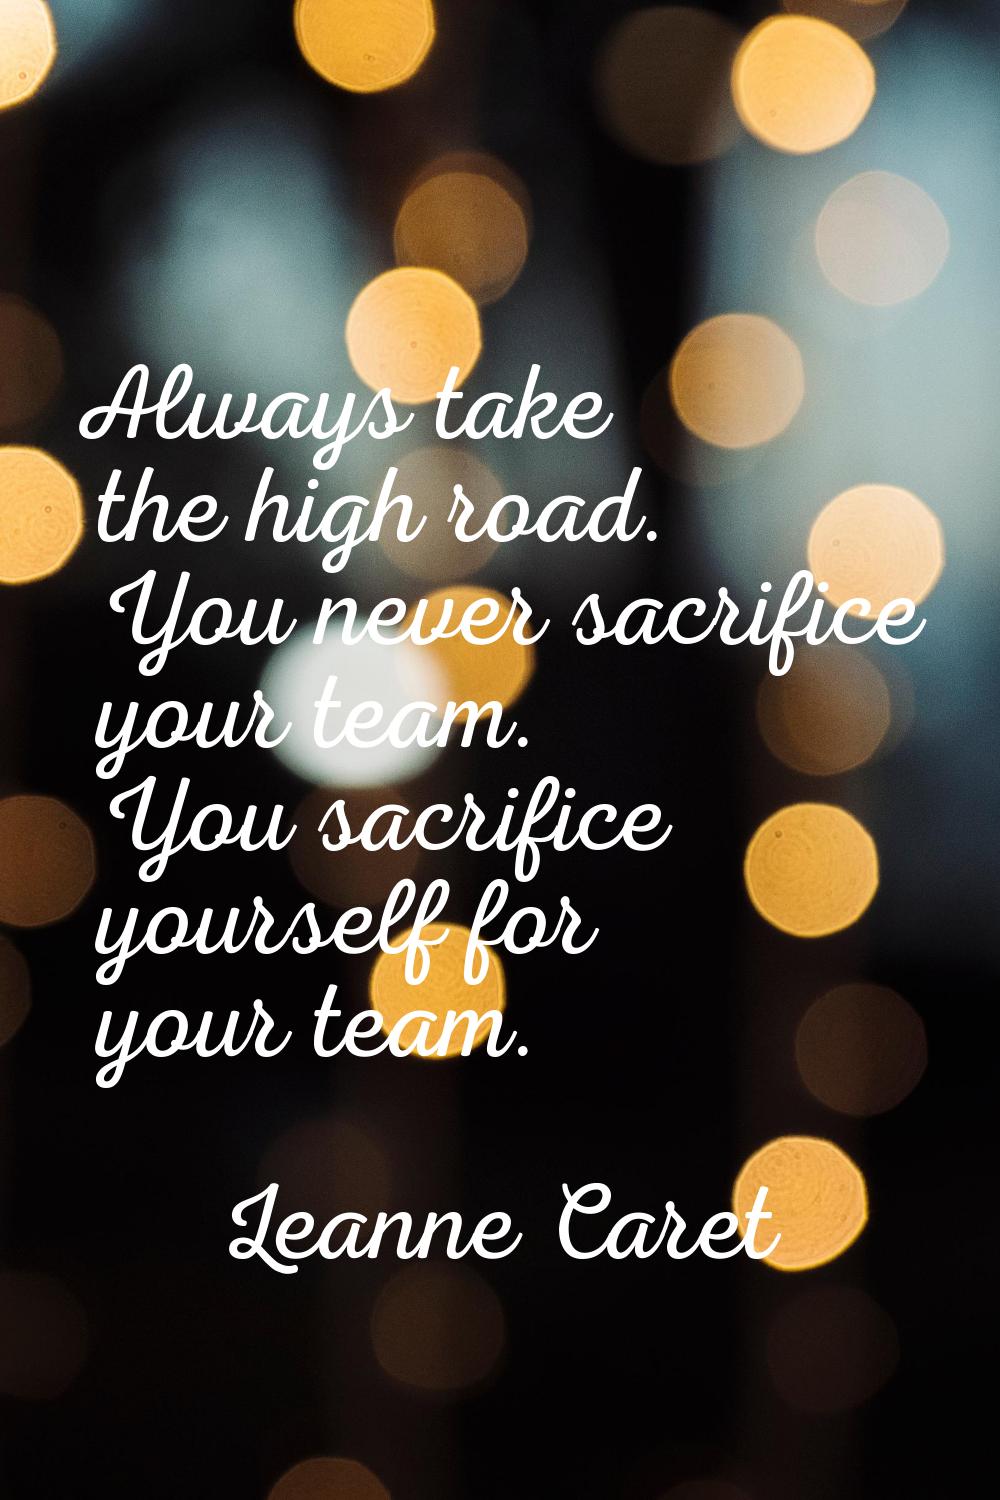 Always take the high road. You never sacrifice your team. You sacrifice yourself for your team.